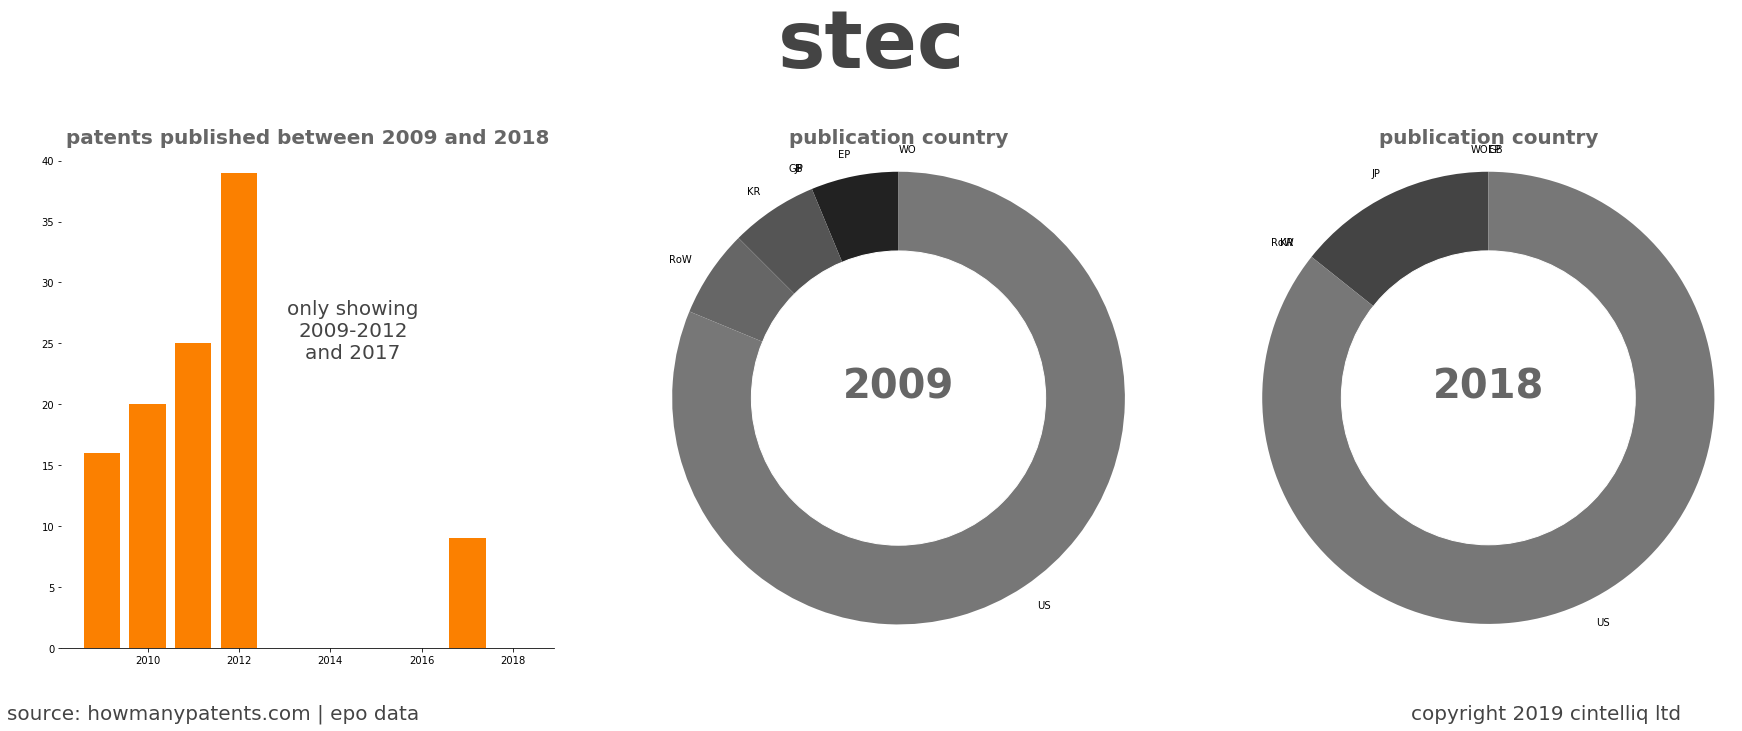 summary of patents for Stec